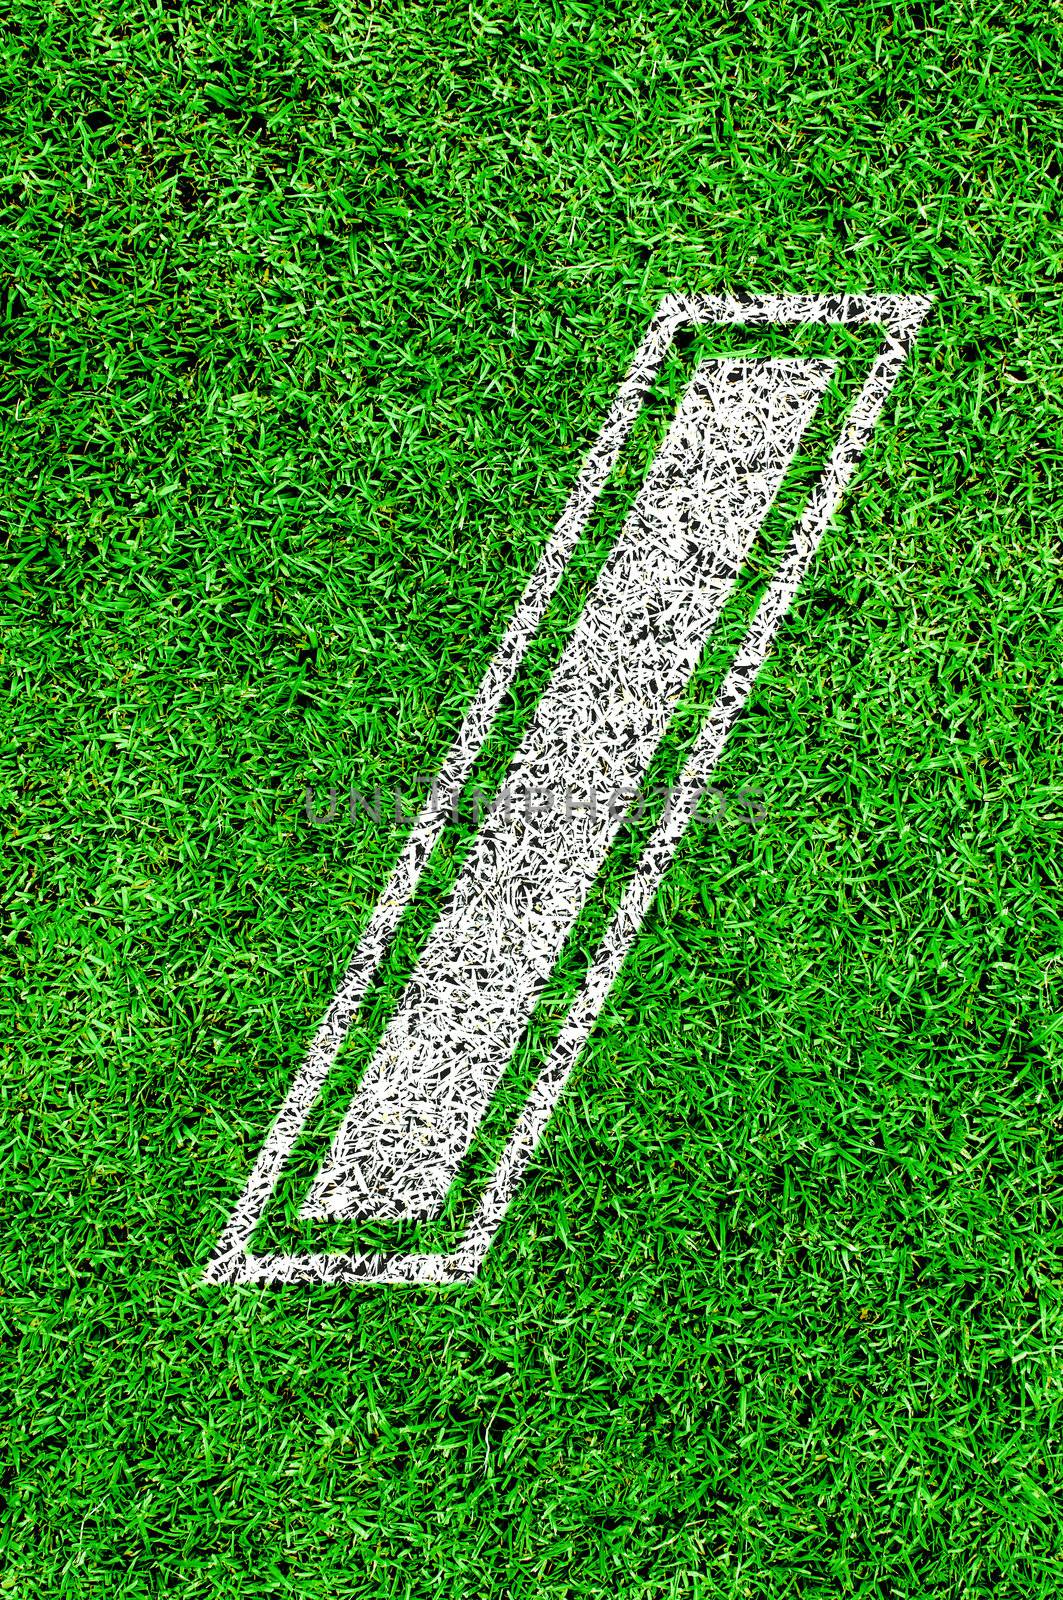 White line number on green grass